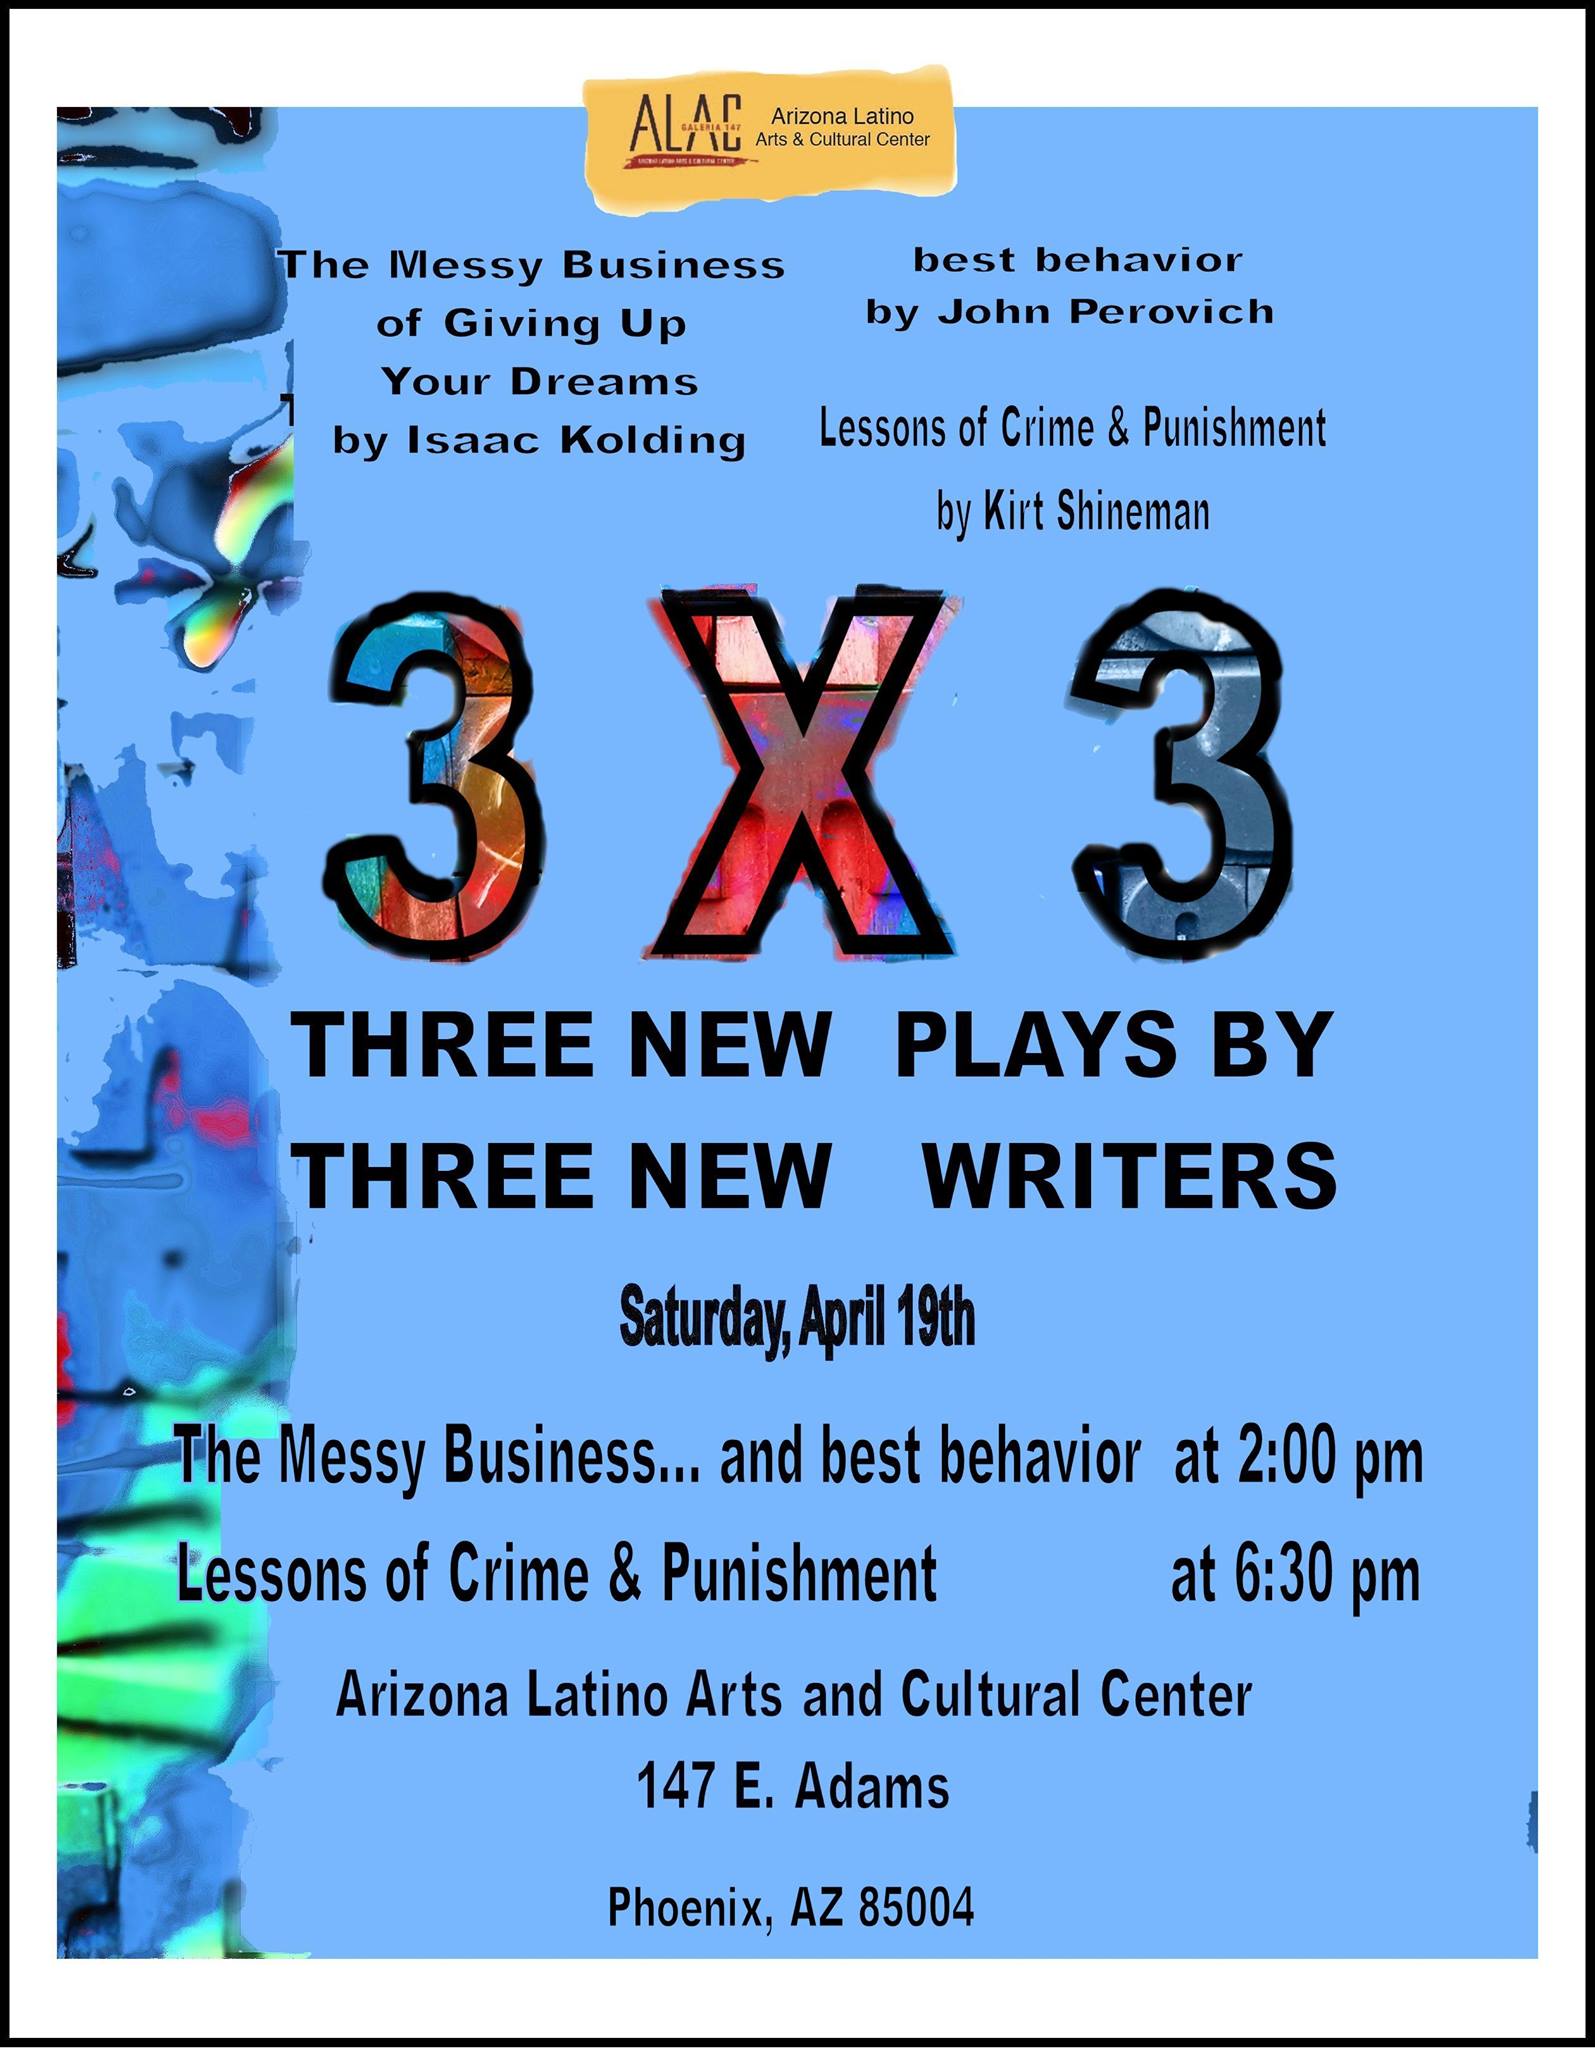 April 19, 2014 A poster for 3 x 3, an afternoon and evening of plays at the Arizona Latino Arts & Cultural Center.